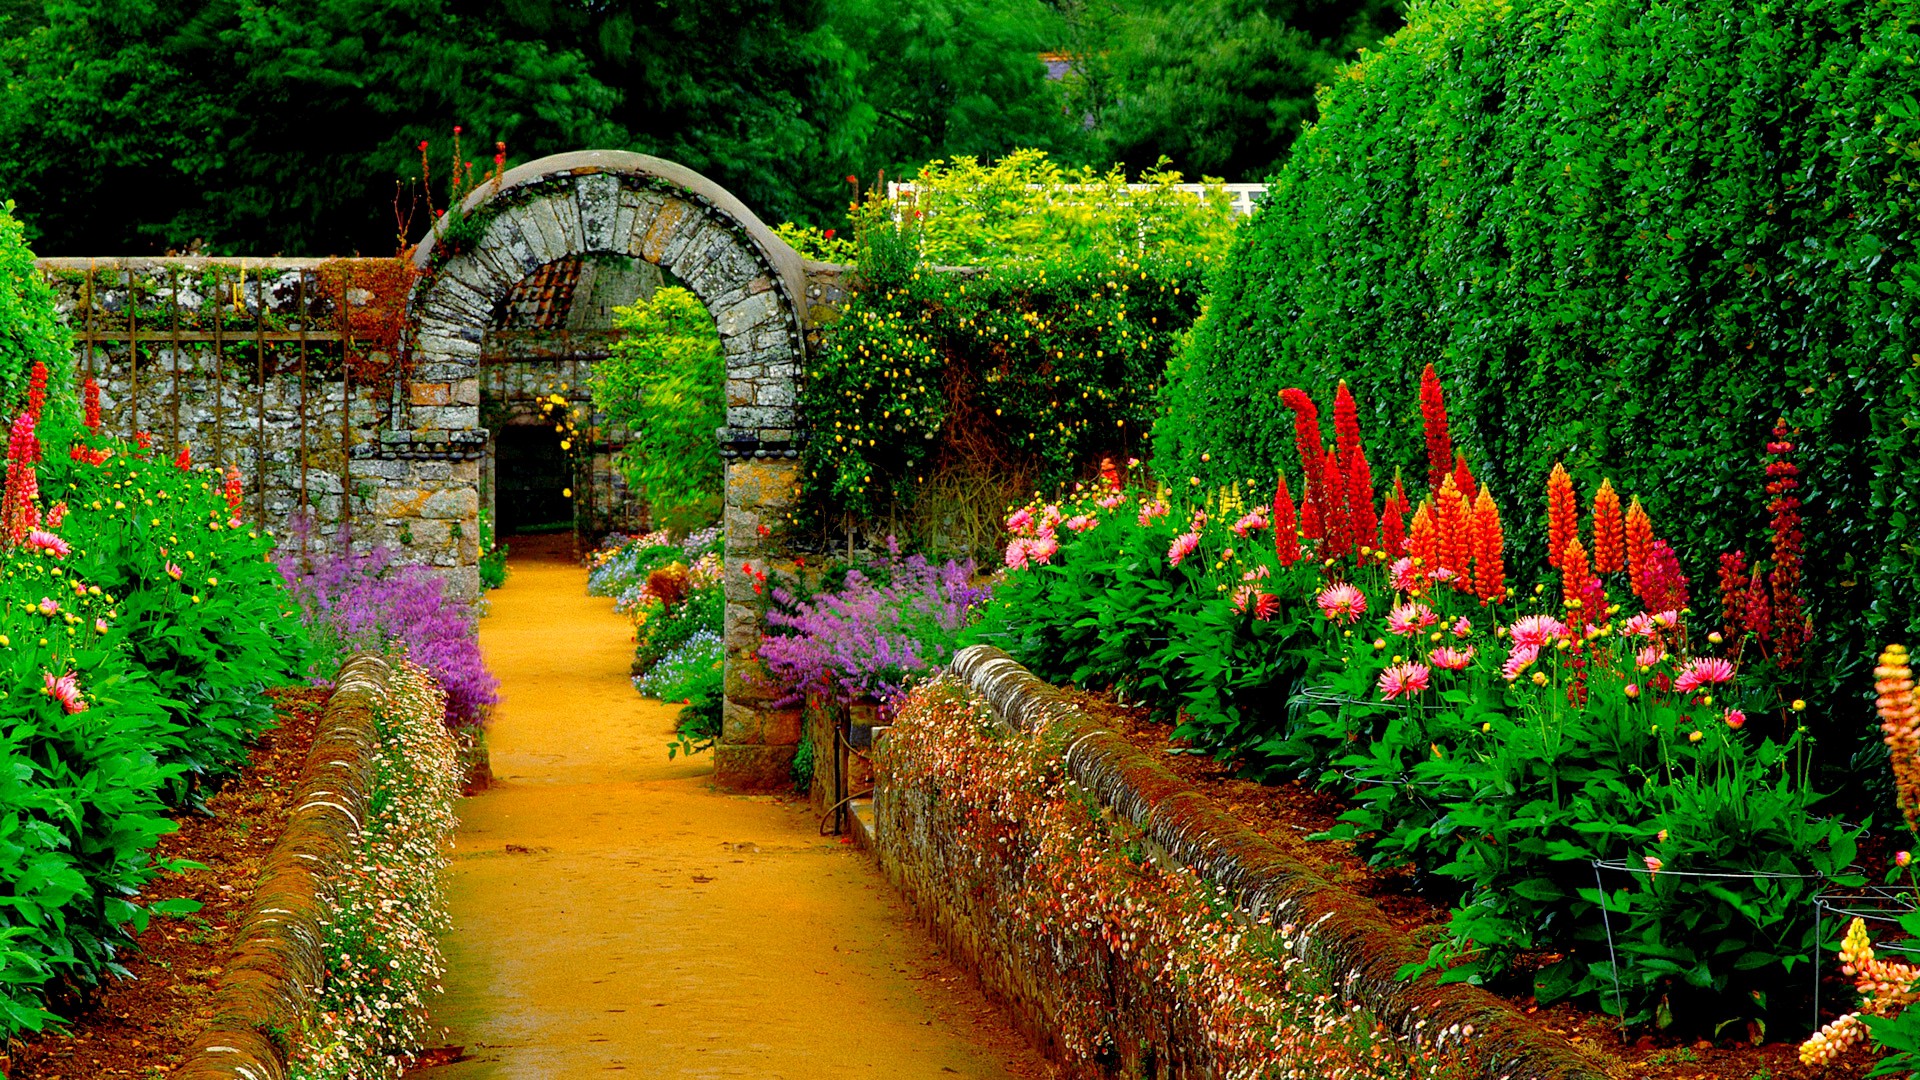 Download Country Garden wallpaper in Nature wallpapers with all 1920x1080